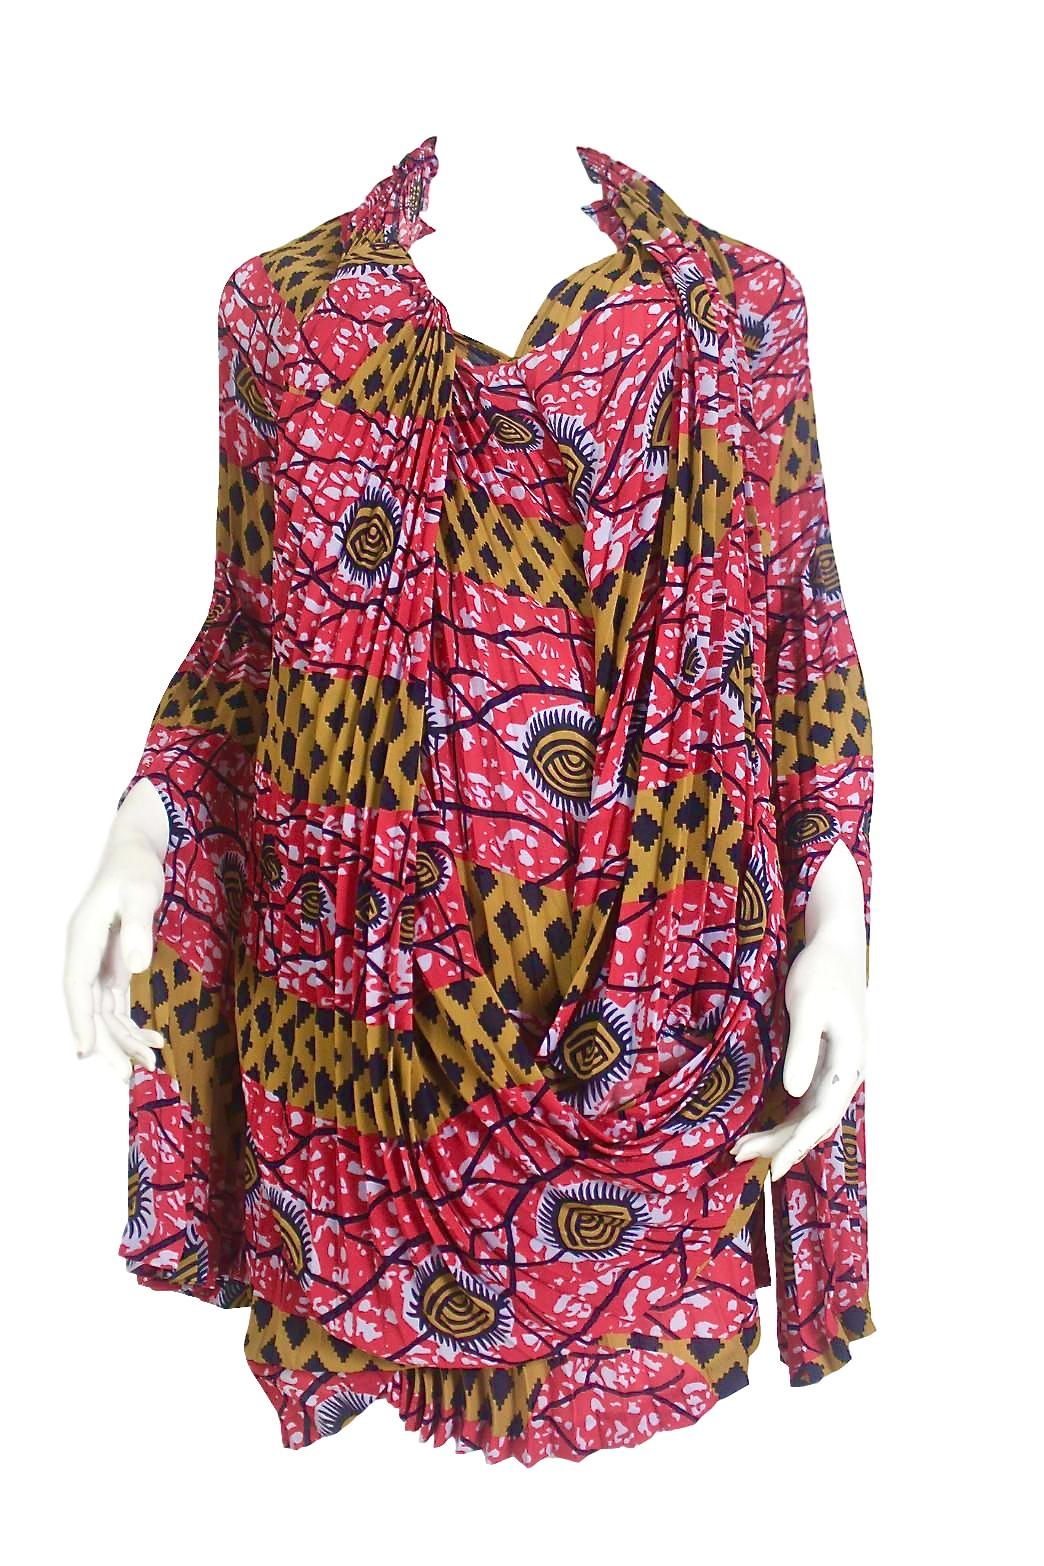 Comme des Garçons Junya Watanabe African Open Back Print Dress AD 2009 In Excellent Condition For Sale In Bath, GB